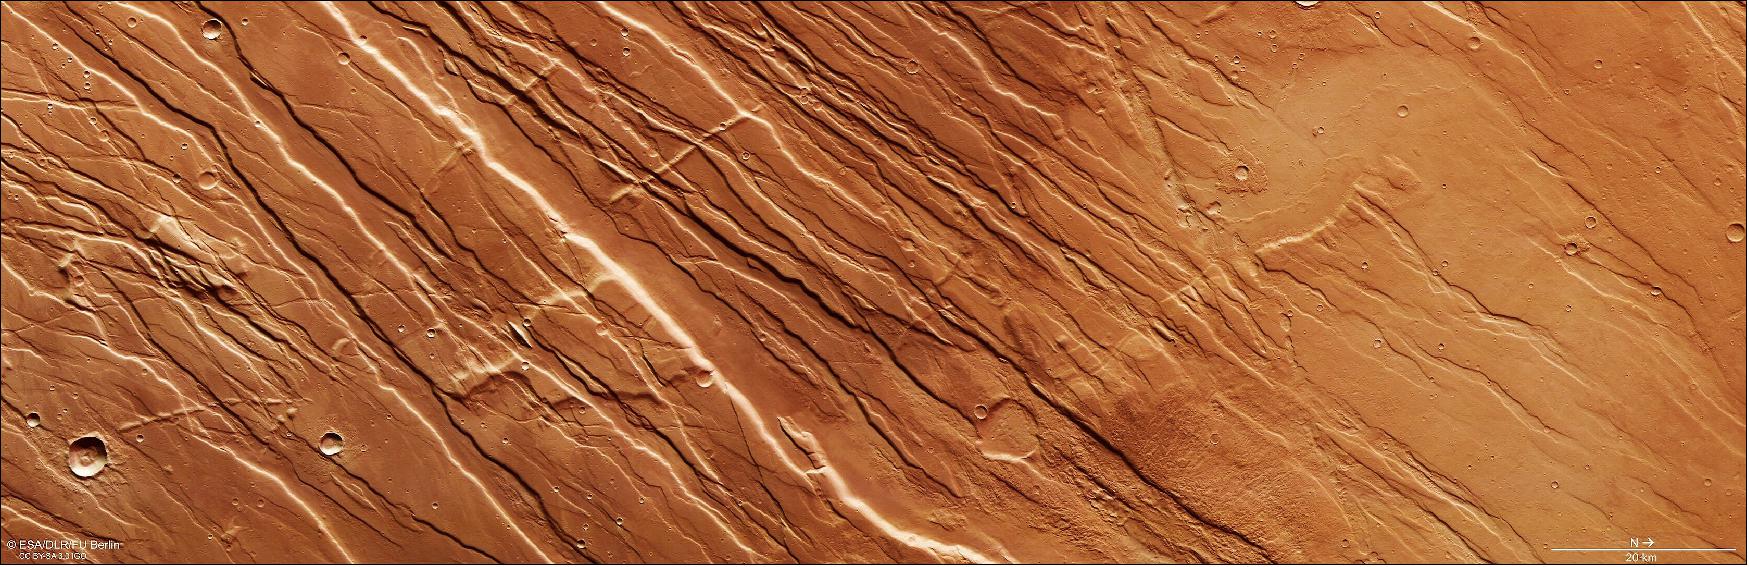 Figure 93: Located just northeast of the colossal Tharsis volcanic-tectonic province on Mars, the landscape shown in this image from ESA’s Mars Express is a mix of faults, elevated ground, deep valleys, and largely parallel ridges, extending both down into the surface and up above the martian crust. This is a portion of Tempe Fossae – a series of tectonic faults that cuts across Tempe Terra in Mars’ northern highlands. This region is a great example of terrain featuring two key martian features: grabens and horsts. In a way, these are opposites of one another – grabens are slices of ground that have dropped down between two roughly parallel faults, while horsts are ground that has been uplifted between faults. Both were created by tremendous volcanic and tectonic forces acting across the surface of Mars, which fractured the ground and manipulated it into new configurations. The surface to the right of the frame is smoother, created as lava flooded the region before cooling and solidifying, and some perpendicular slices across the predominantly parallel ridges can be seen to the left of the frame. As the nearby Tharsis province grew larger, it stretched and stressed the surrounding crust – and these features are evidence of a change in the direction of stress. This image comprises data gathered on 30 September 2019 during orbit 19913. The ground resolution is approximately 15 m/pixel and the images are centered at about 279°E/36°N. This image was created using data from the nadir and color channels of the High Resolution Stereo Camera (HRSC). The nadir channel is aligned perpendicular to the surface of Mars, as if looking straight down at the surface. North is to the right (image credit: ESA/DLR/FU Berlin, CC BY-SA 3.0 IGO)